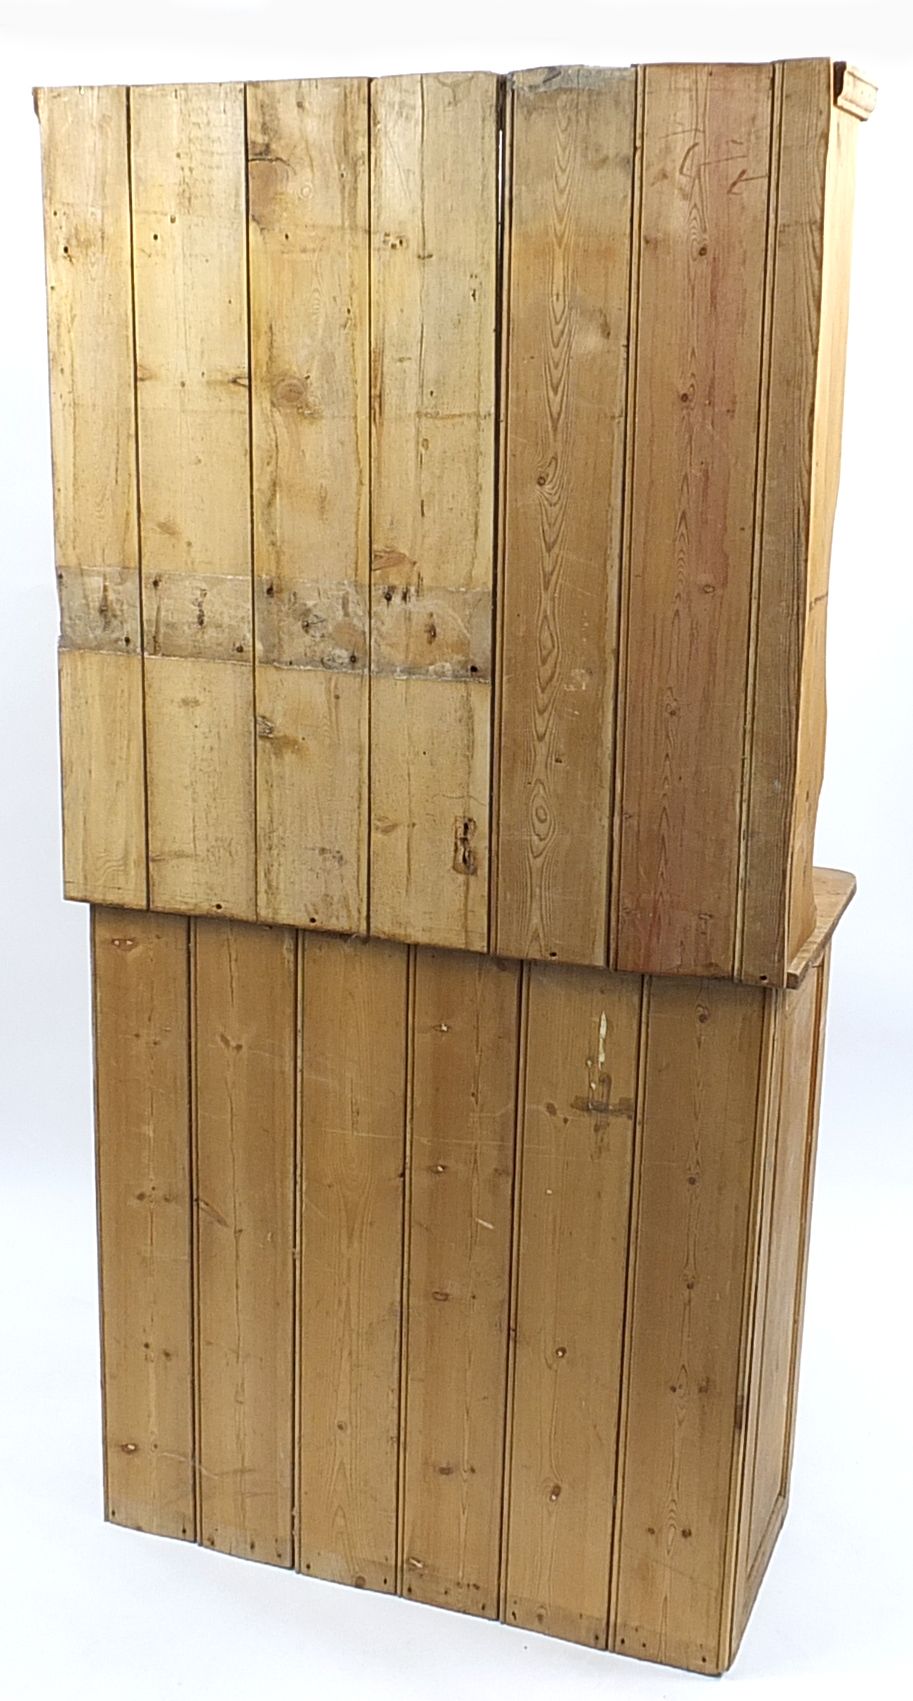 Pine dresser with open plate rack above a drawer and cupboard base, 182cm H x 90cm W x 44cm D - Image 2 of 2